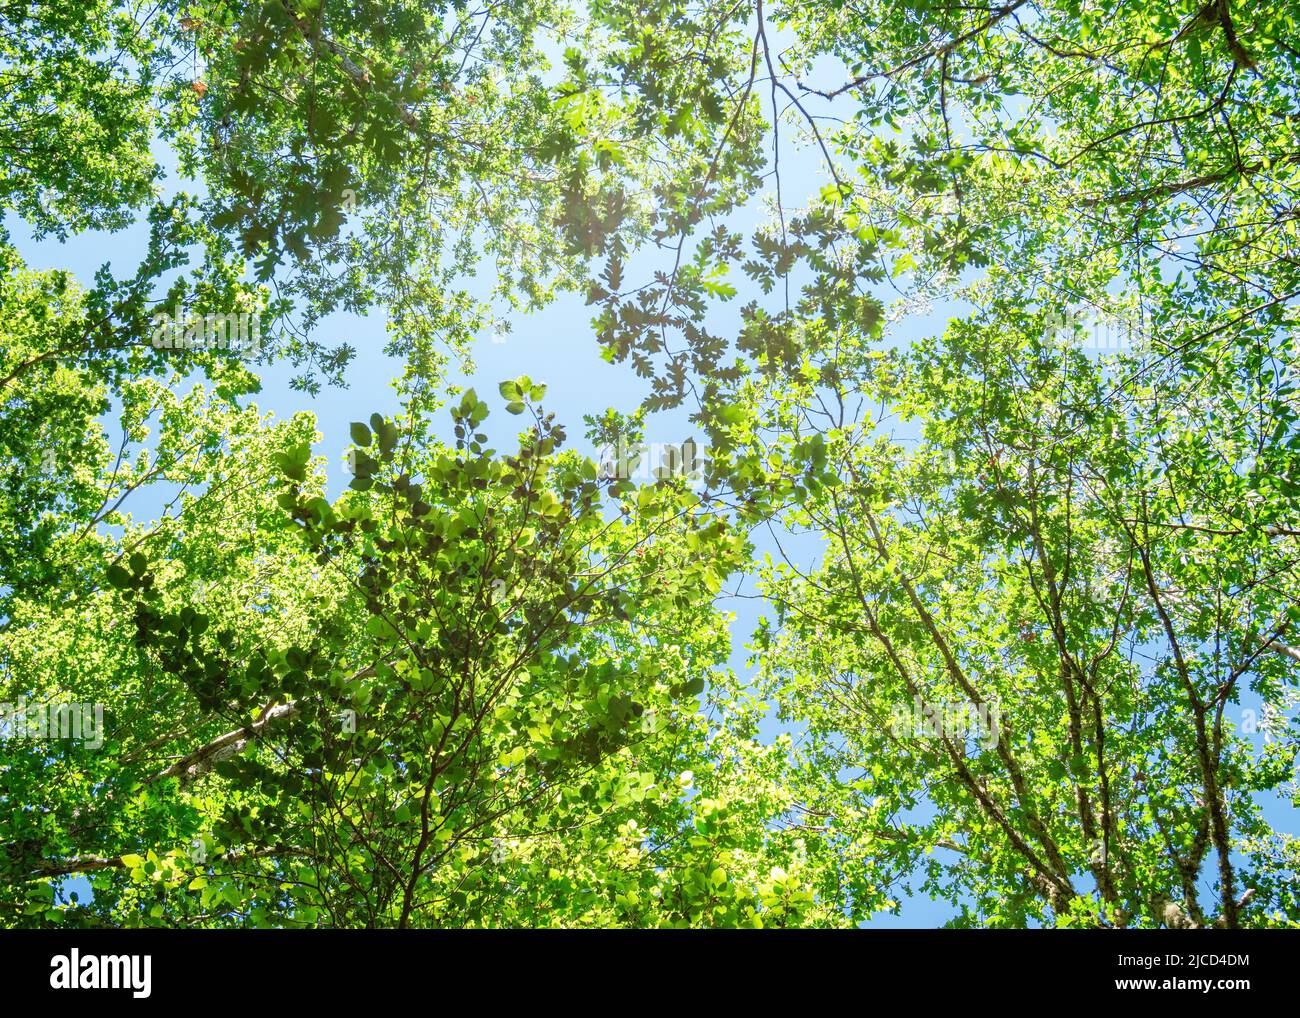 Spring branch with leaves against blue sky Stock Photo